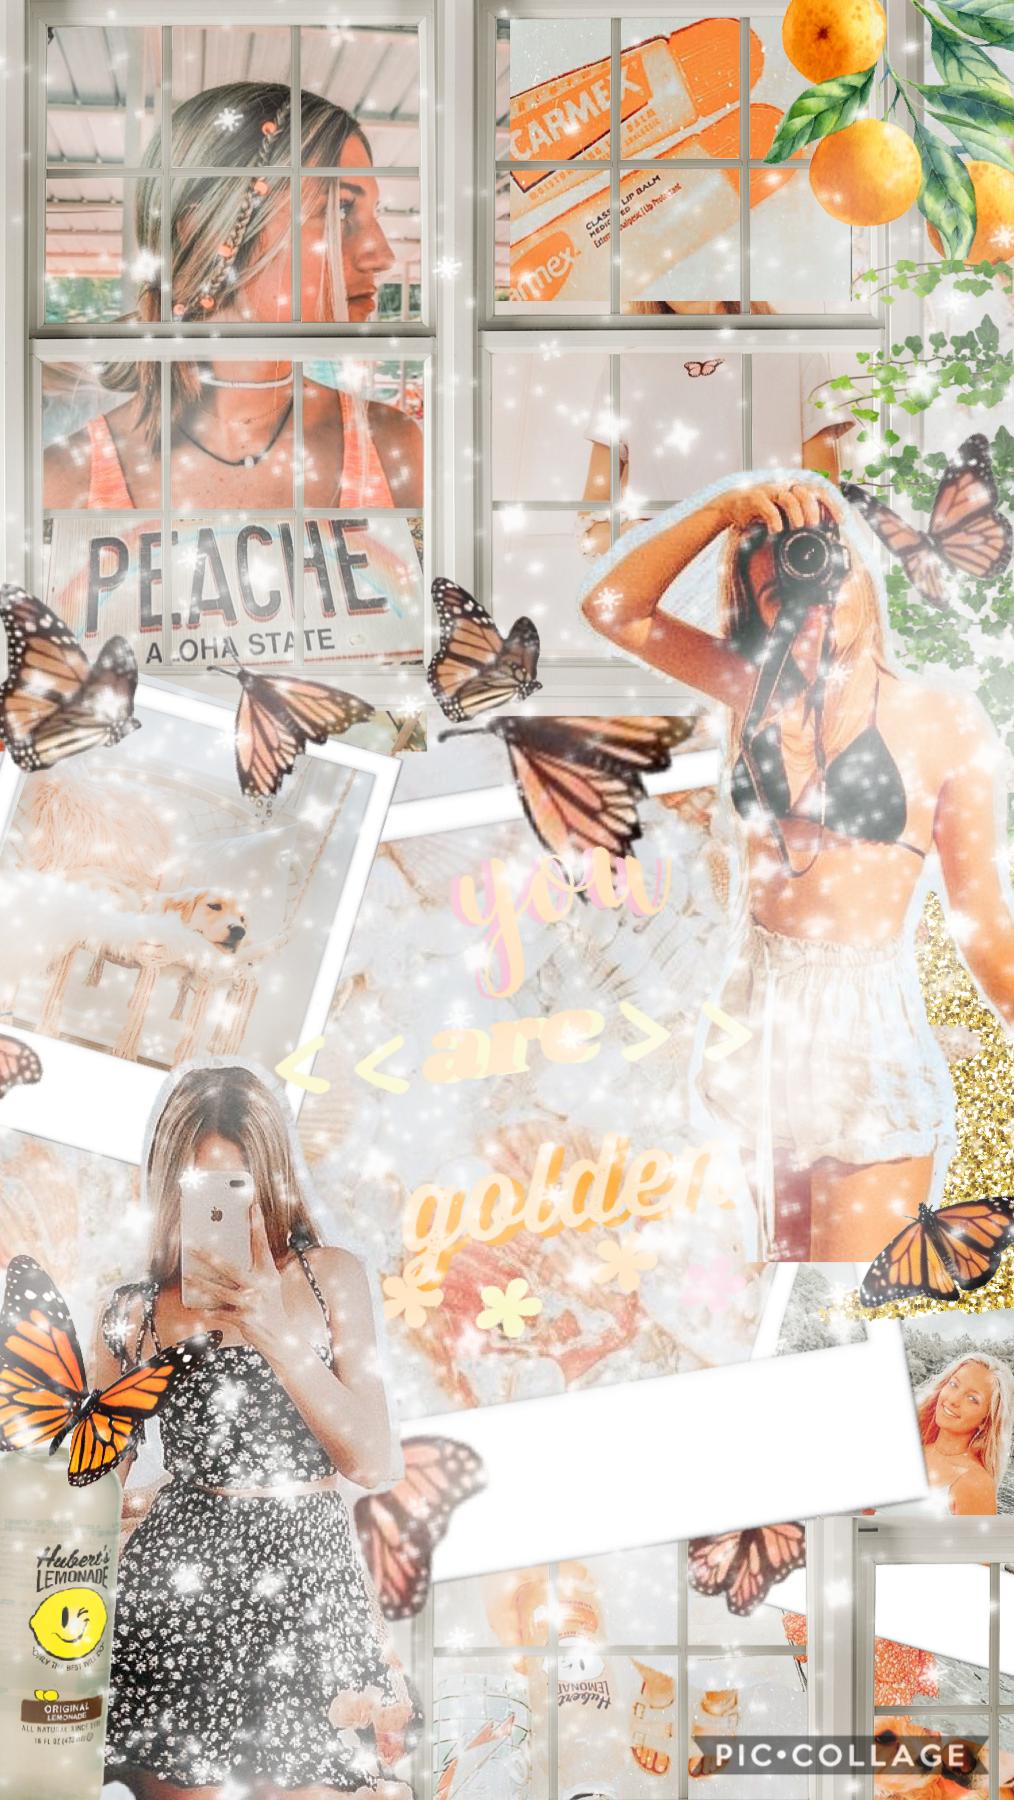 🦋tap🦋
7/31/20
this was inspired by dreaming happily i really like how it turned out! should i do more collages like these??